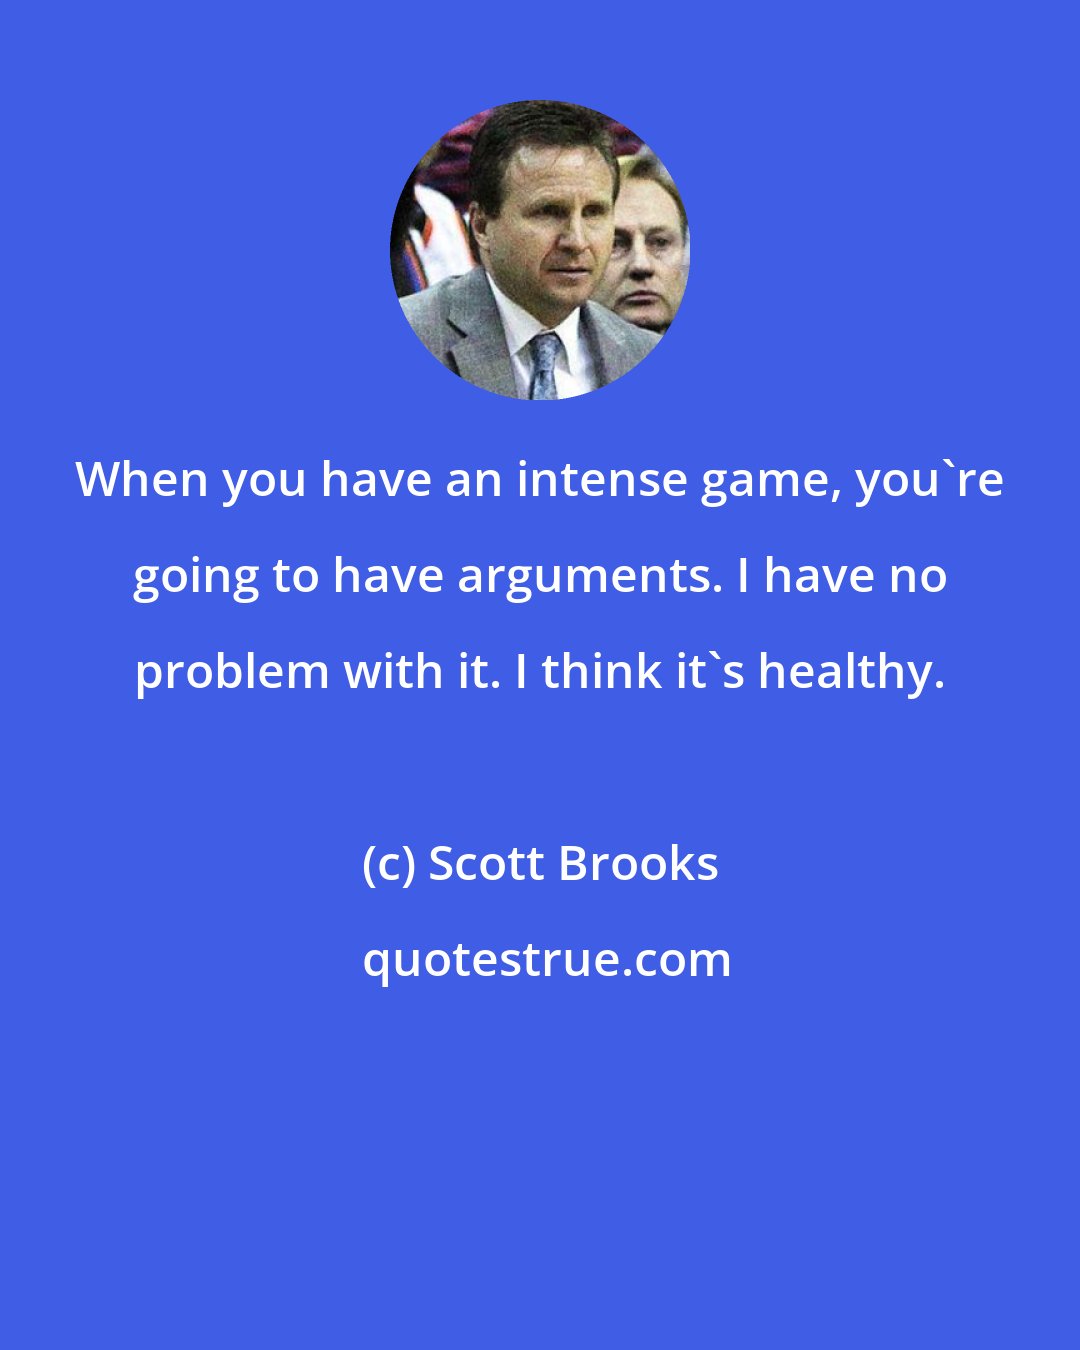 Scott Brooks: When you have an intense game, you're going to have arguments. I have no problem with it. I think it's healthy.